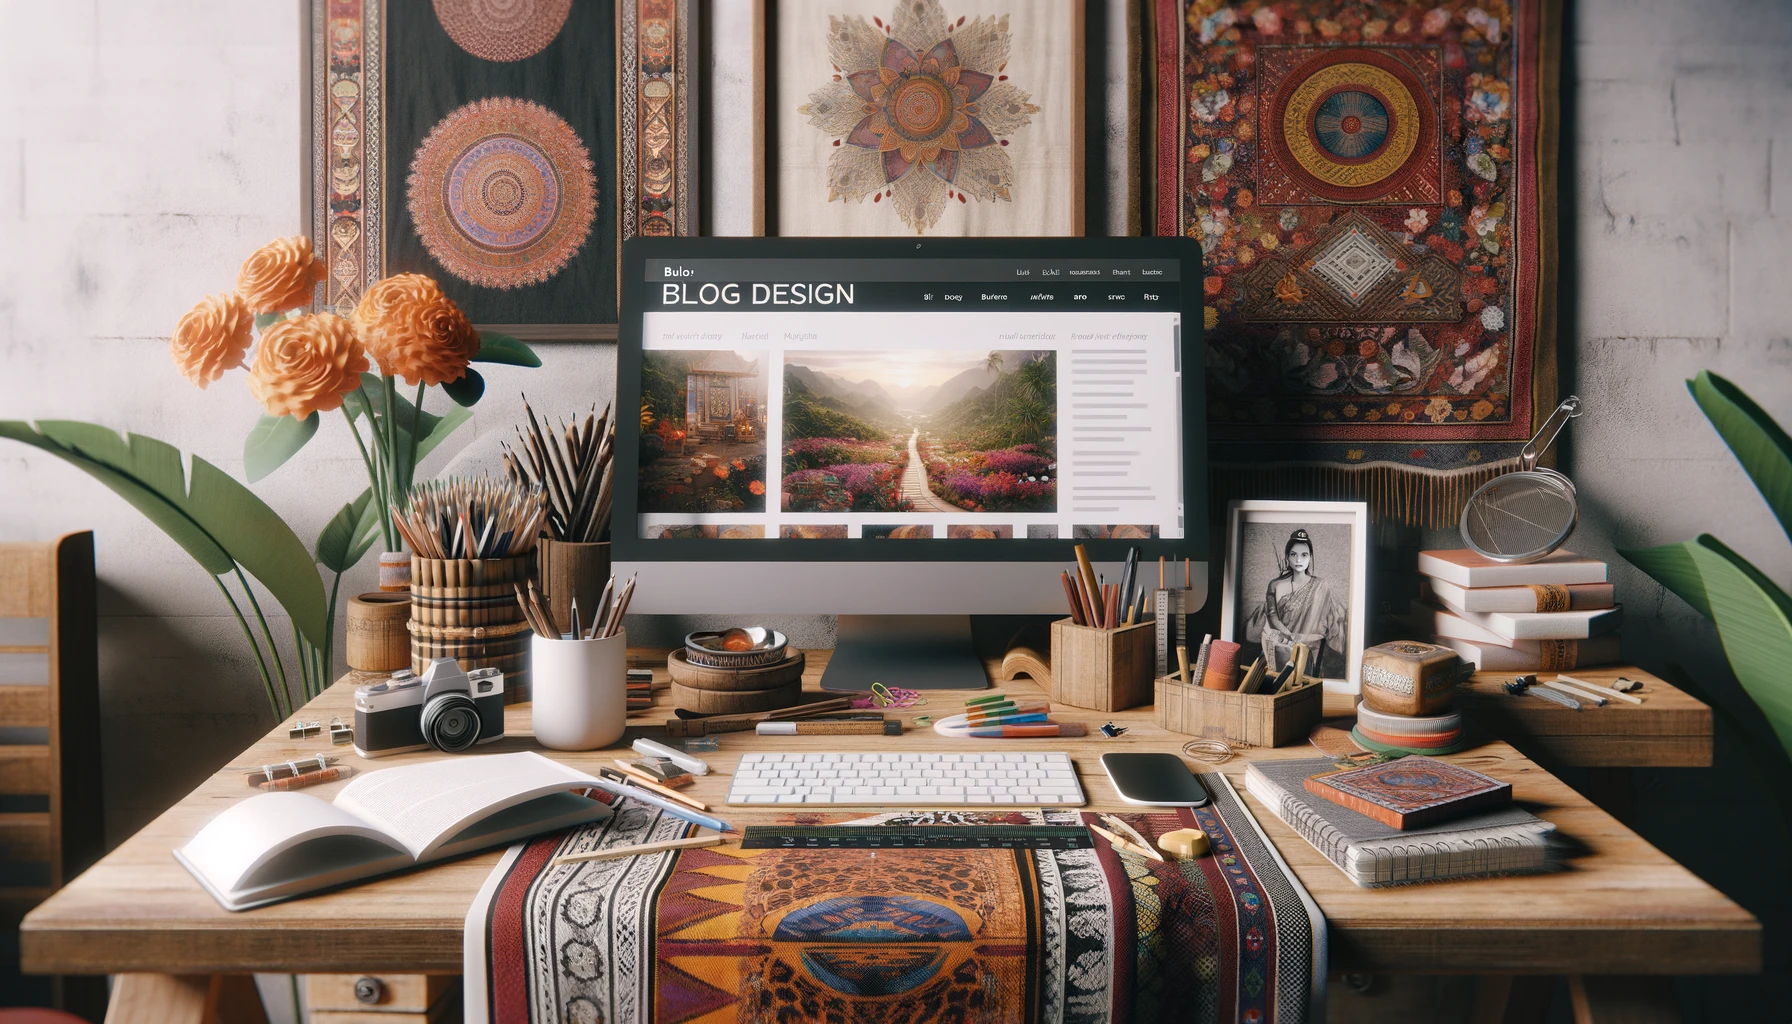 Creative workspace showcasing blog design inspiration, merging Chiang Mai’s cultural aesthetics with digital content strategy tools."